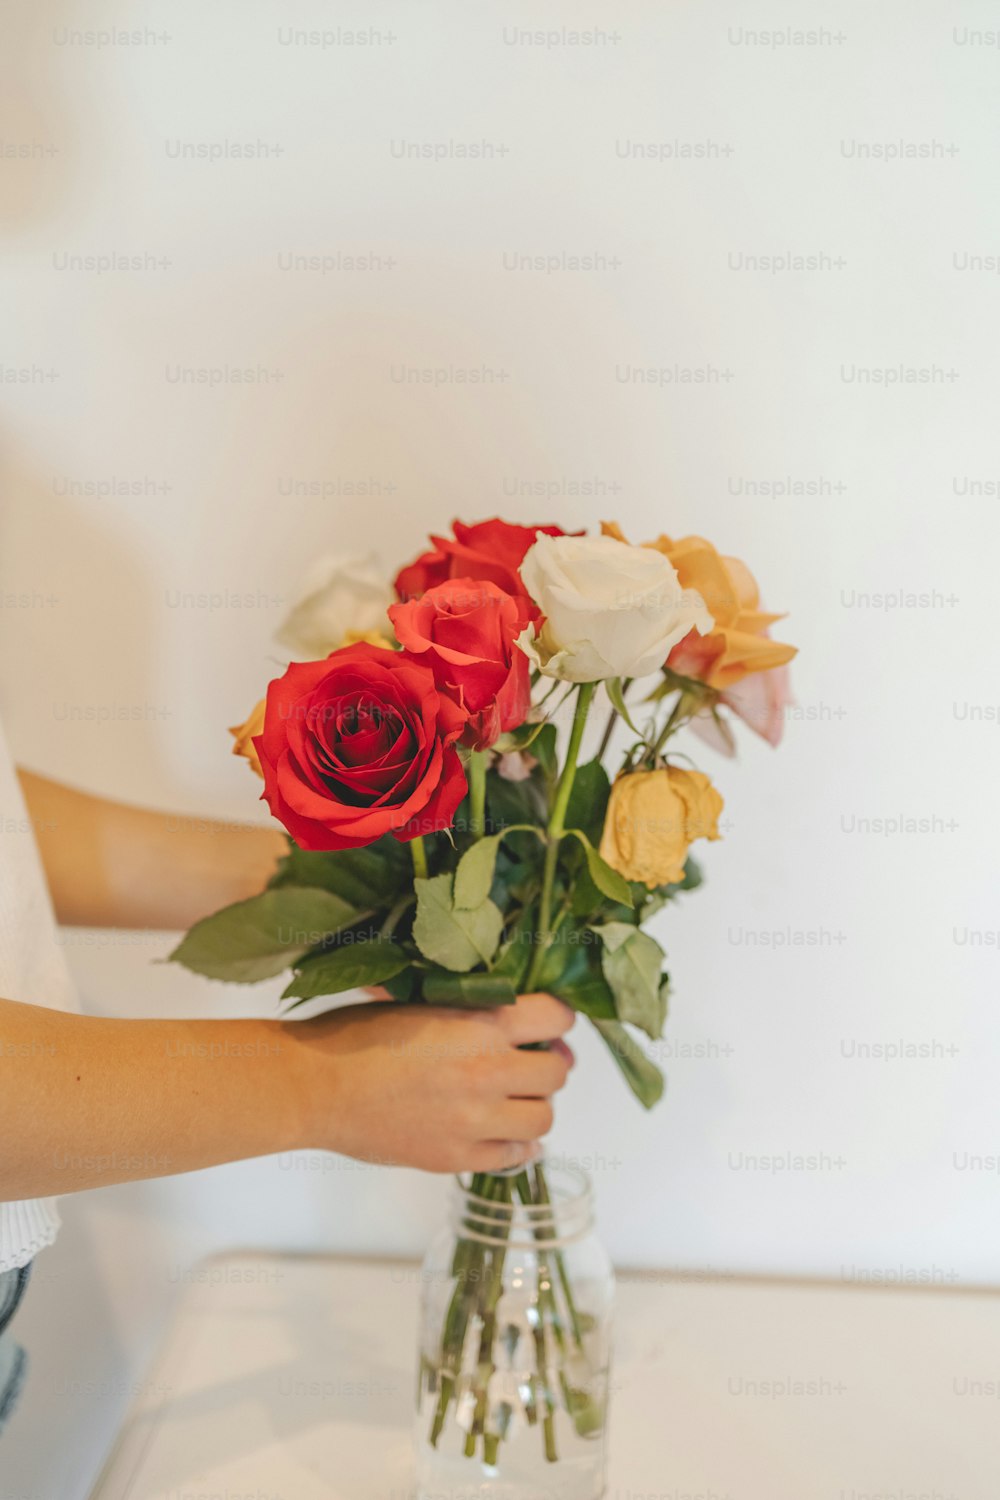 a person holding a vase of flowers on a table